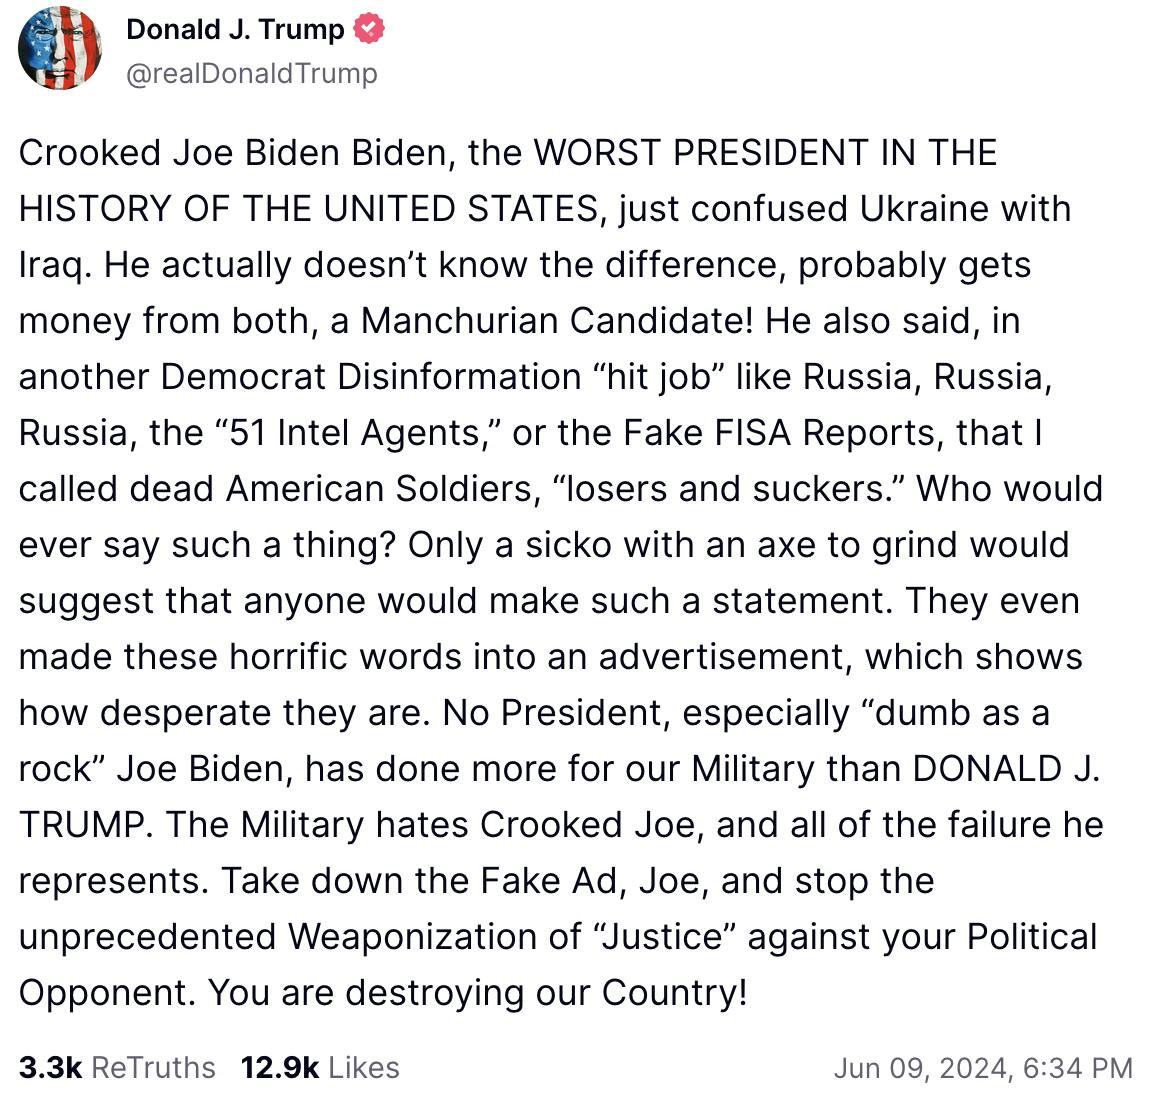 Trump Truth Social June 9, 2024: Crooked Joe Biden Biden, the WORST PRESIDENT IN THE HISTORY OF THE UNITED STATES, just confused Ukraine with Iraq. He actually doesn’t know the difference, probably gets money from both, a Manchurian Candidate! He also said, in another Democrat Disinformation “hit job” like Russia, Russia, Russia, the “51 Intel Agents,” or the Fake FISA Reports, that I called dead American Soldiers, “losers and suckers.” Who would ever say such a thing? Only a sicko with an axe to grind would suggest that anyone would make such a statement. They even made these horrific words into an advertisement, which shows how desperate they are. No President, especially “dumb as a rock” Joe Biden, has done more for our Military than DONALD J. TRUMP. The Military hates Crooked Joe, and all of the failure he represents. Take down the Fake Ad, Joe, and stop the unprecedented Weaponization of “Justice” against your Political Opponent. You are destroying our Country!